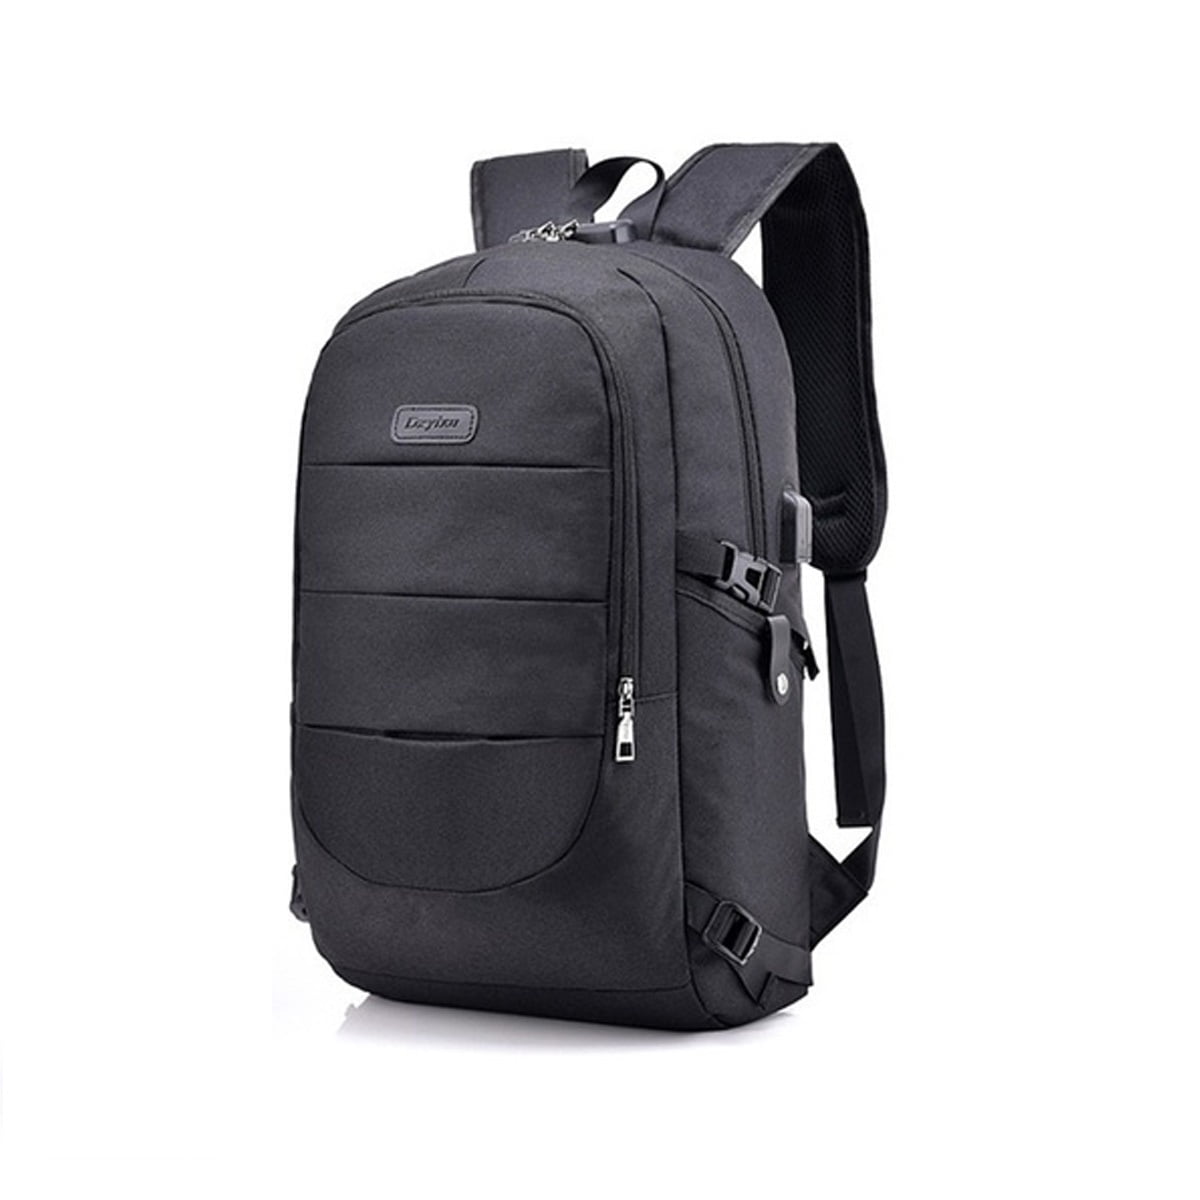 Rocket Man Anti Theft Large Computer Backpack Water-Repellent Casual Daypack